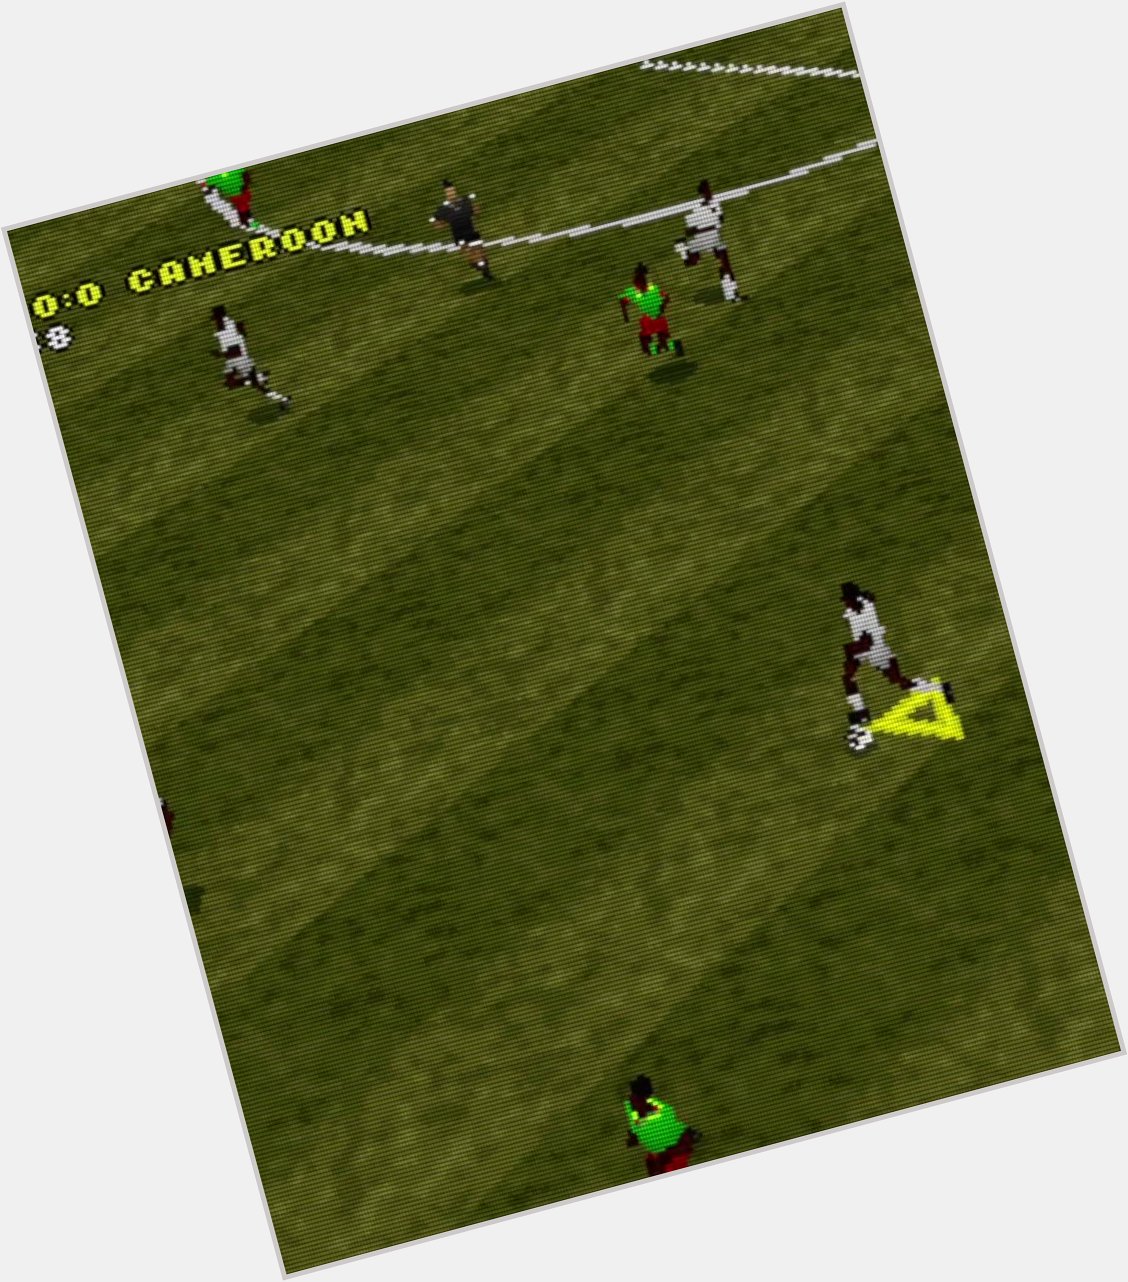  Happy birthday, Tony Yeboah!

They don\t all have to hit the bar first...

Can you name the game? 